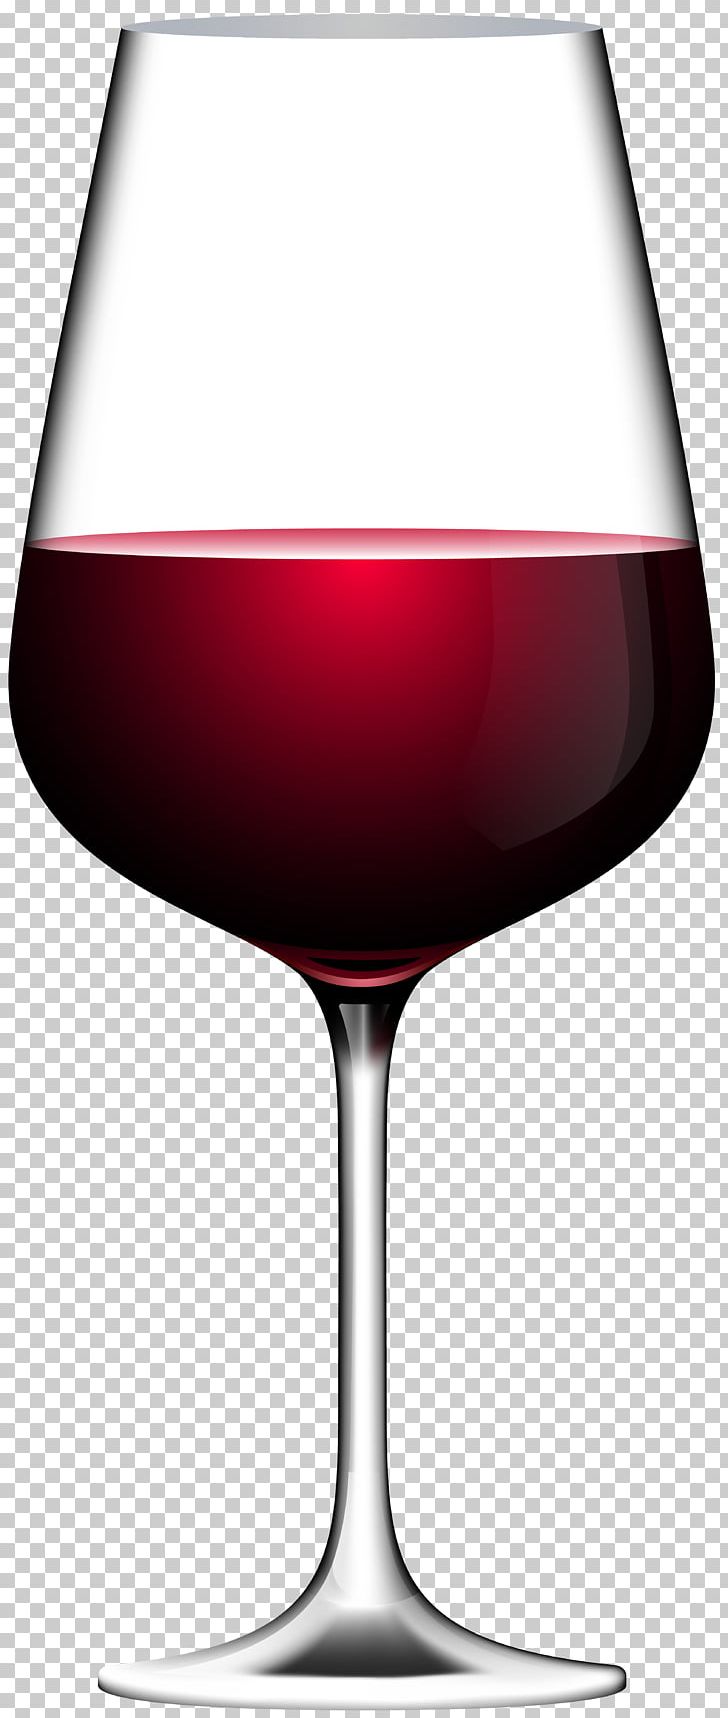 Red Wine White Wine Orlando Wines Wine Glass PNG, Clipart, Alcoholic Drink, Bottle, Champagne Stemware, Drink, Drinkware Free PNG Download